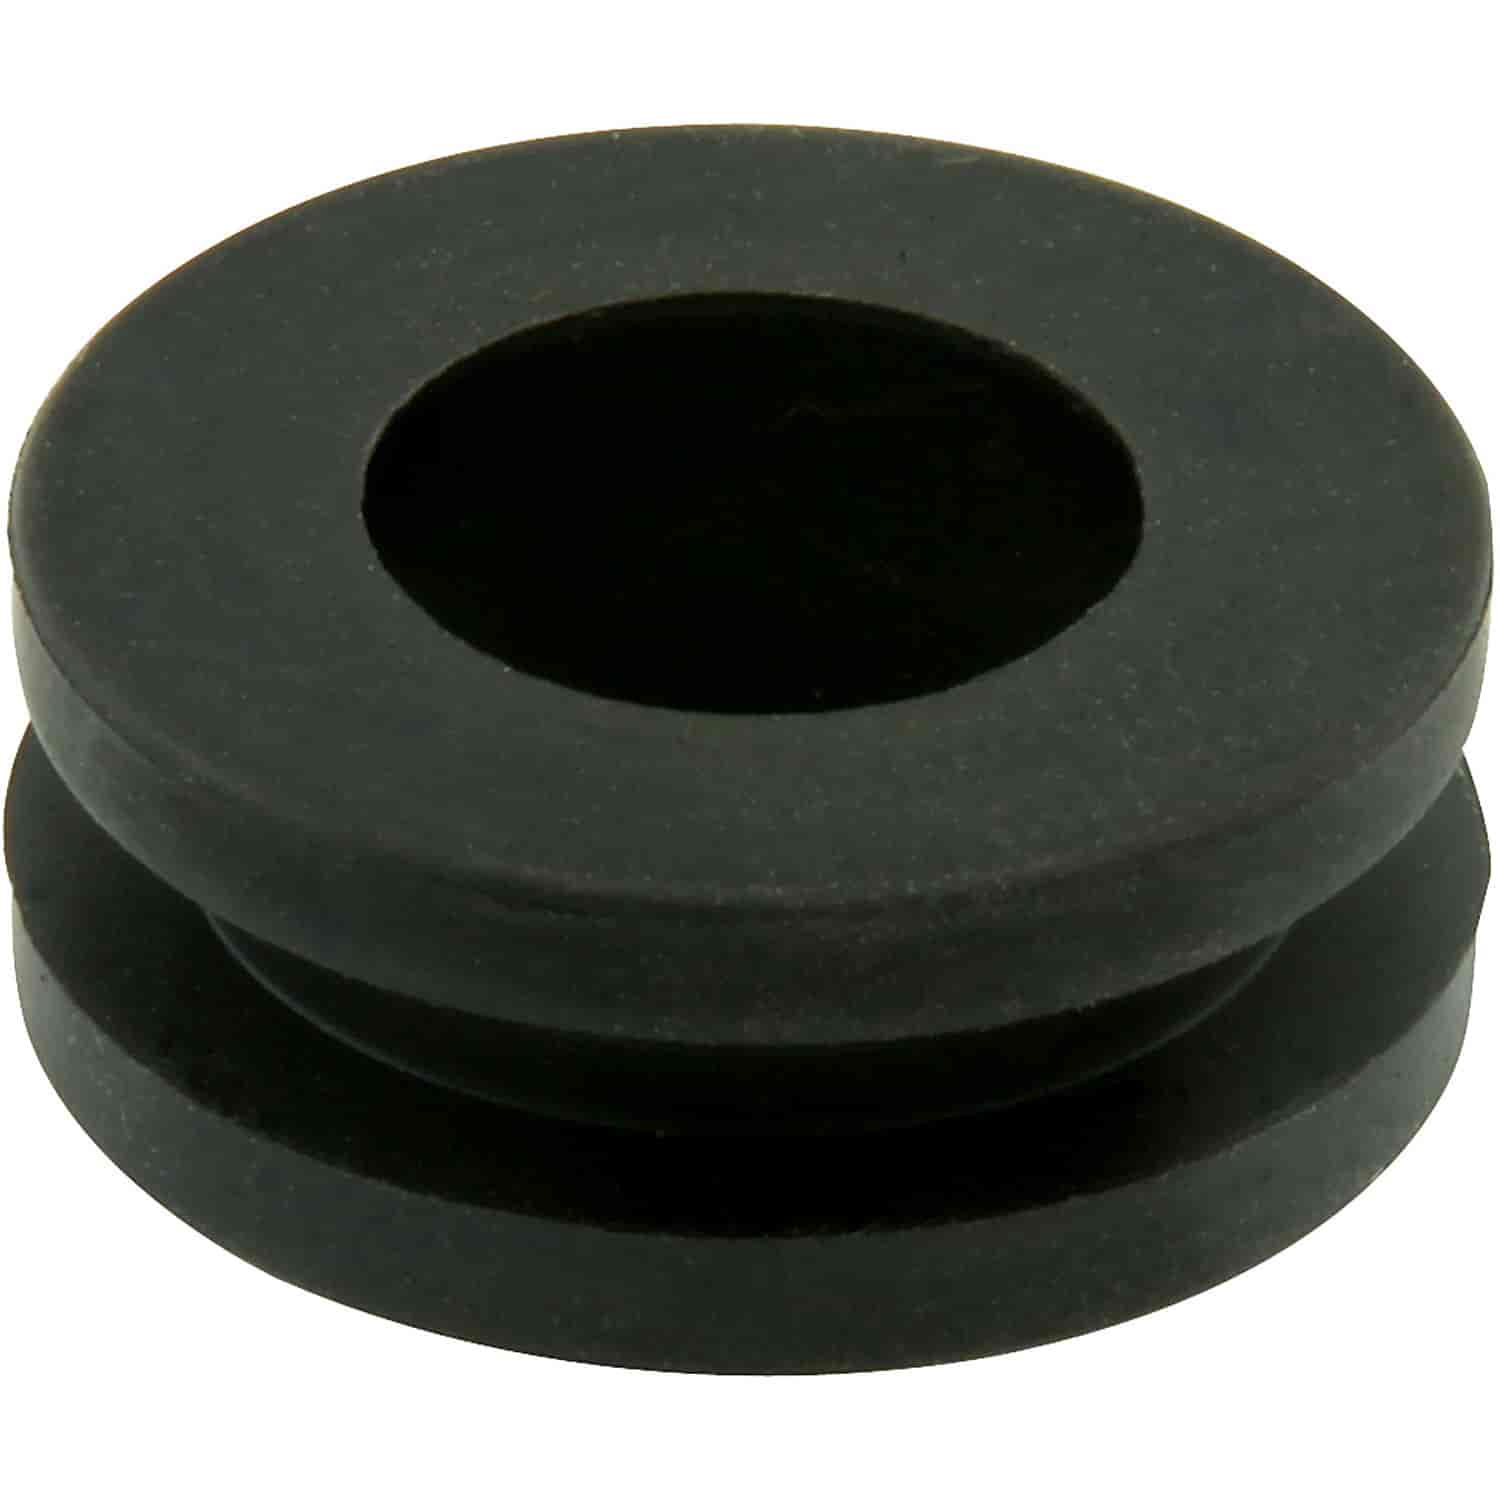 Wheel Disconnect Grommets 4-Pack